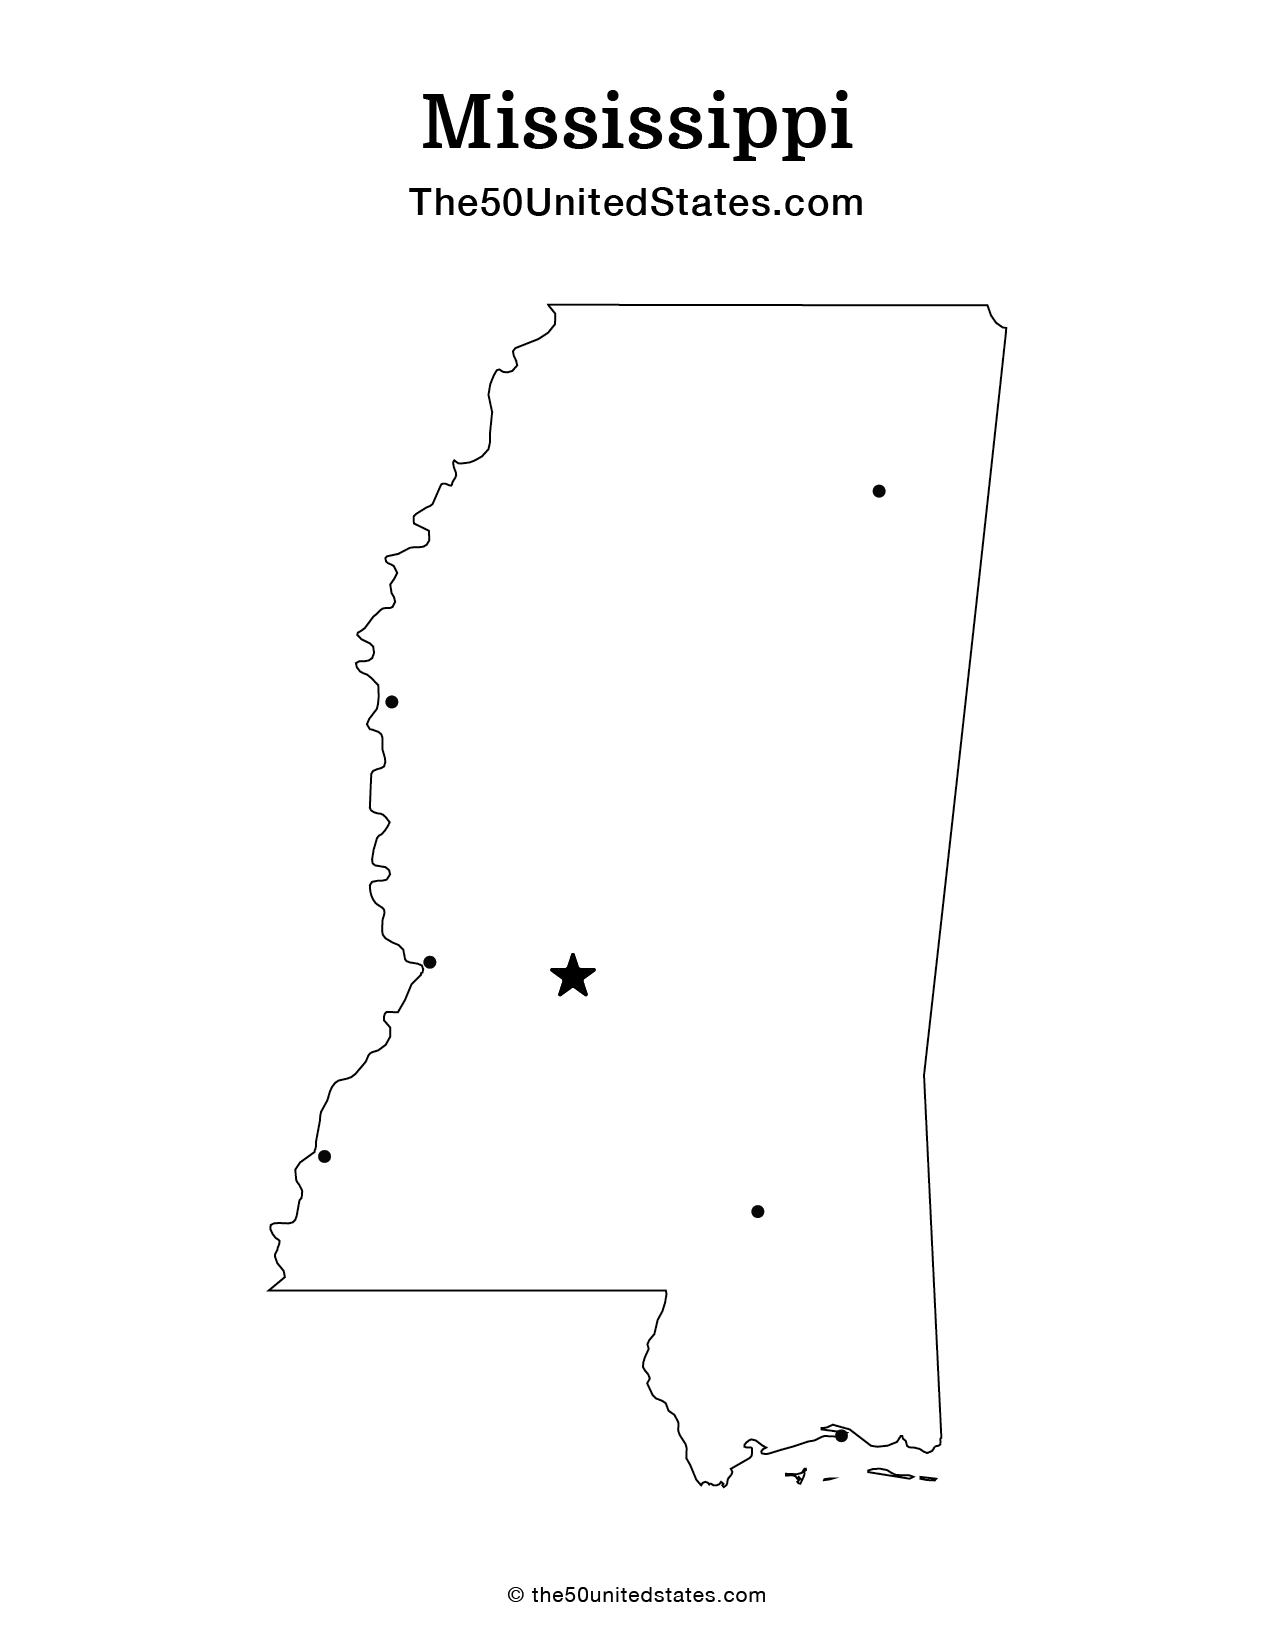 Mississippi with Cities (Blank)